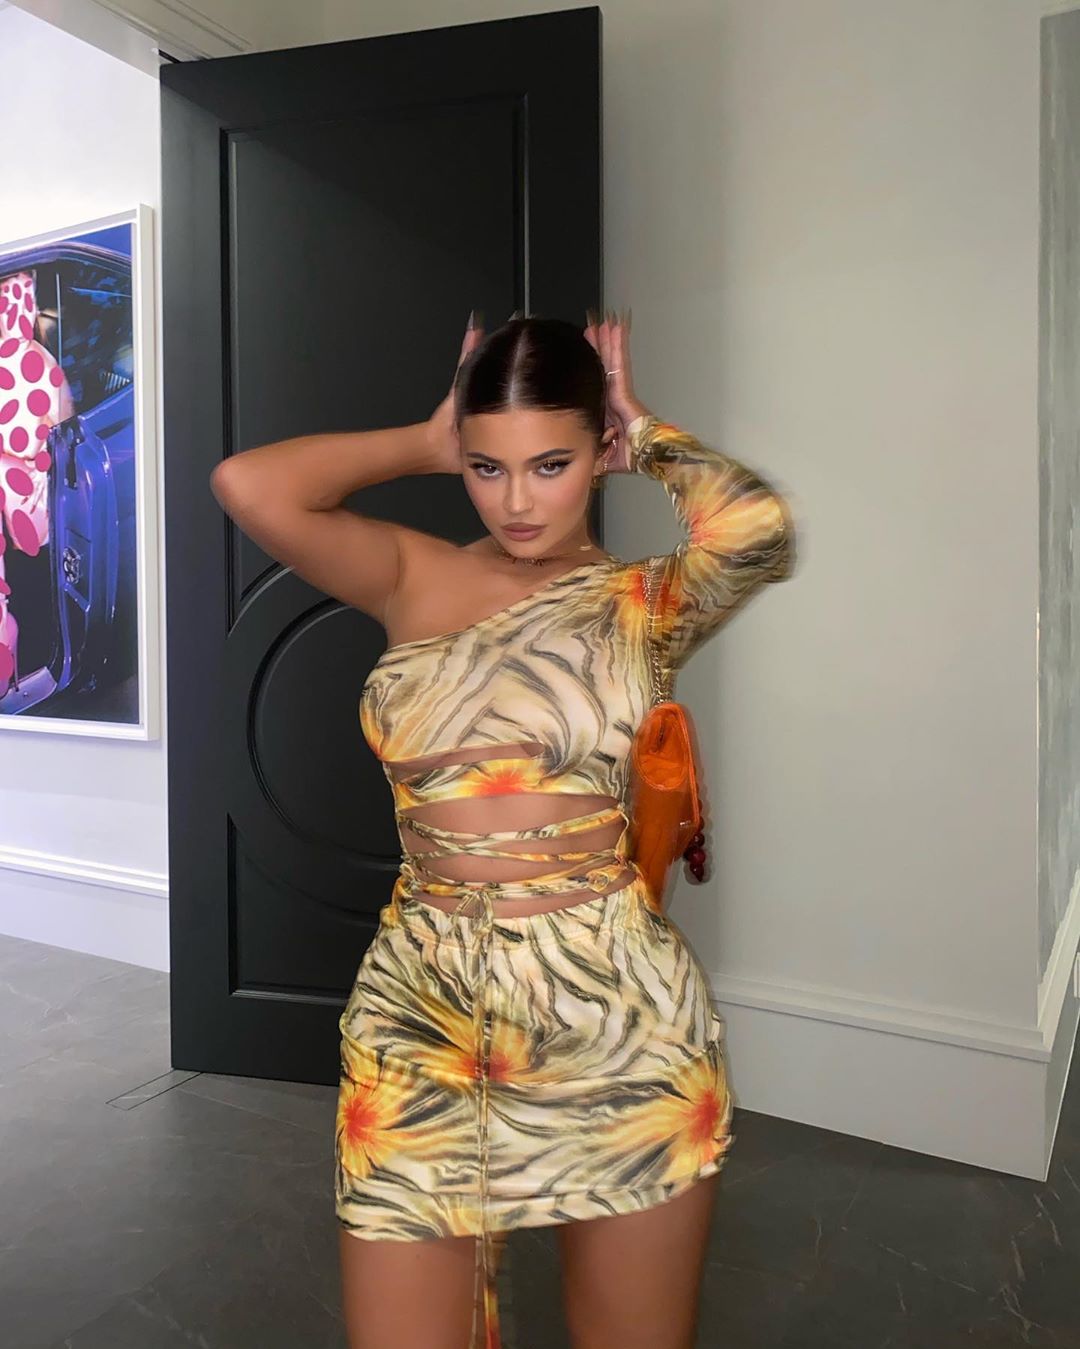 Photos n°6 : Kylie Jenner Shows Off Her Curves!